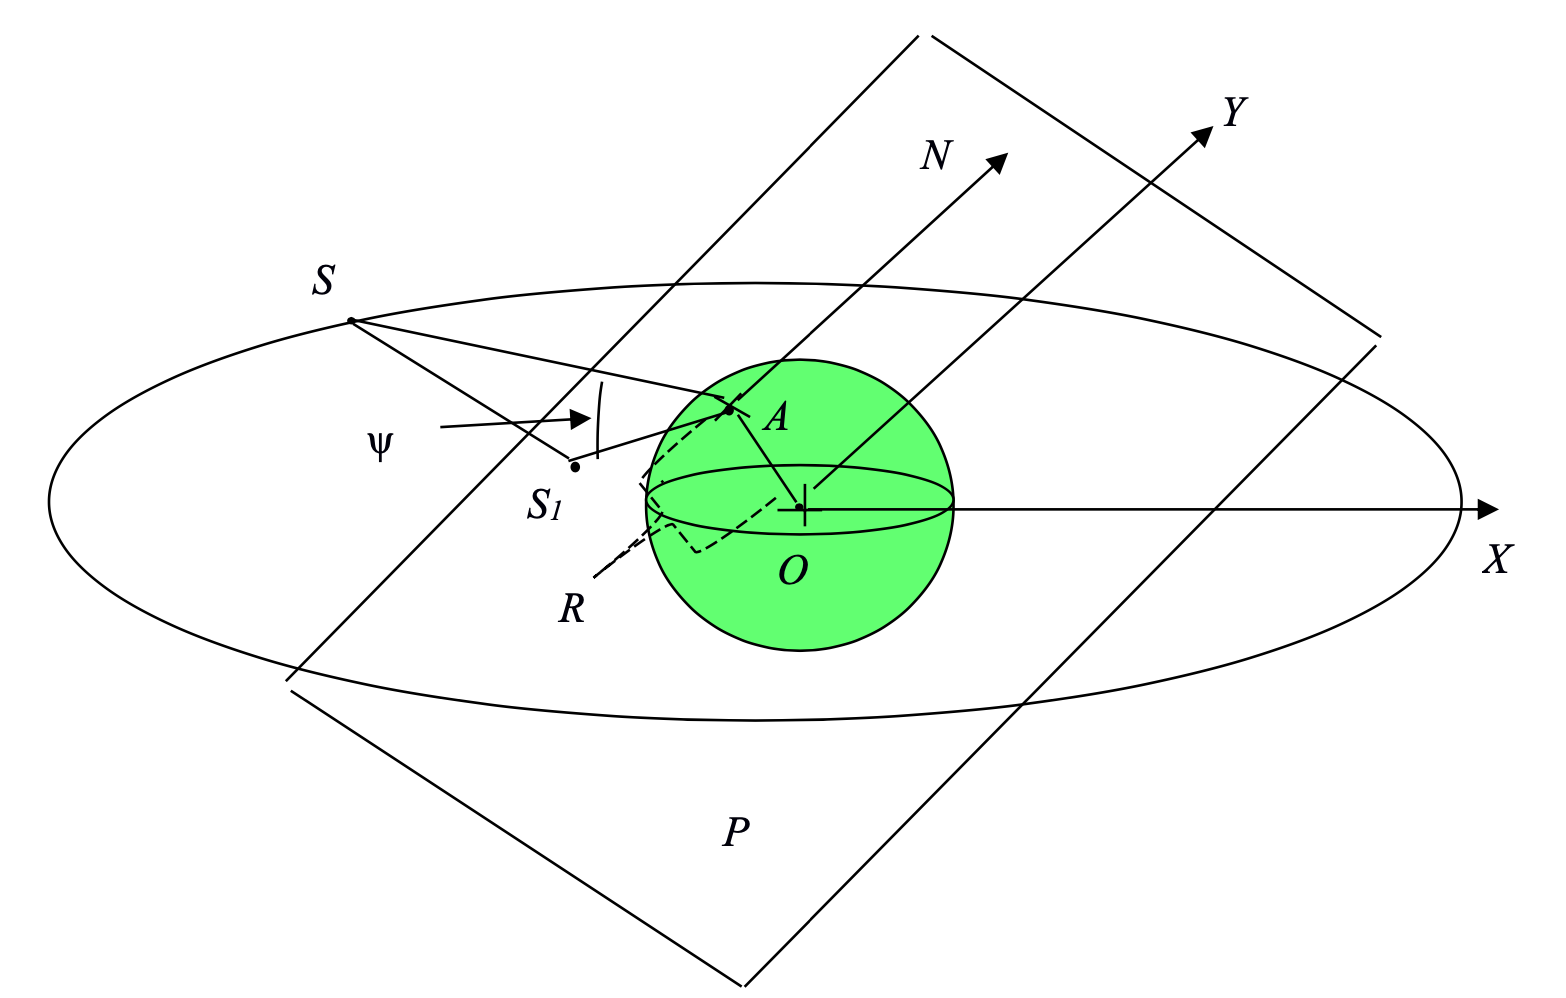  Coordinate system for determining the arc of satellites location